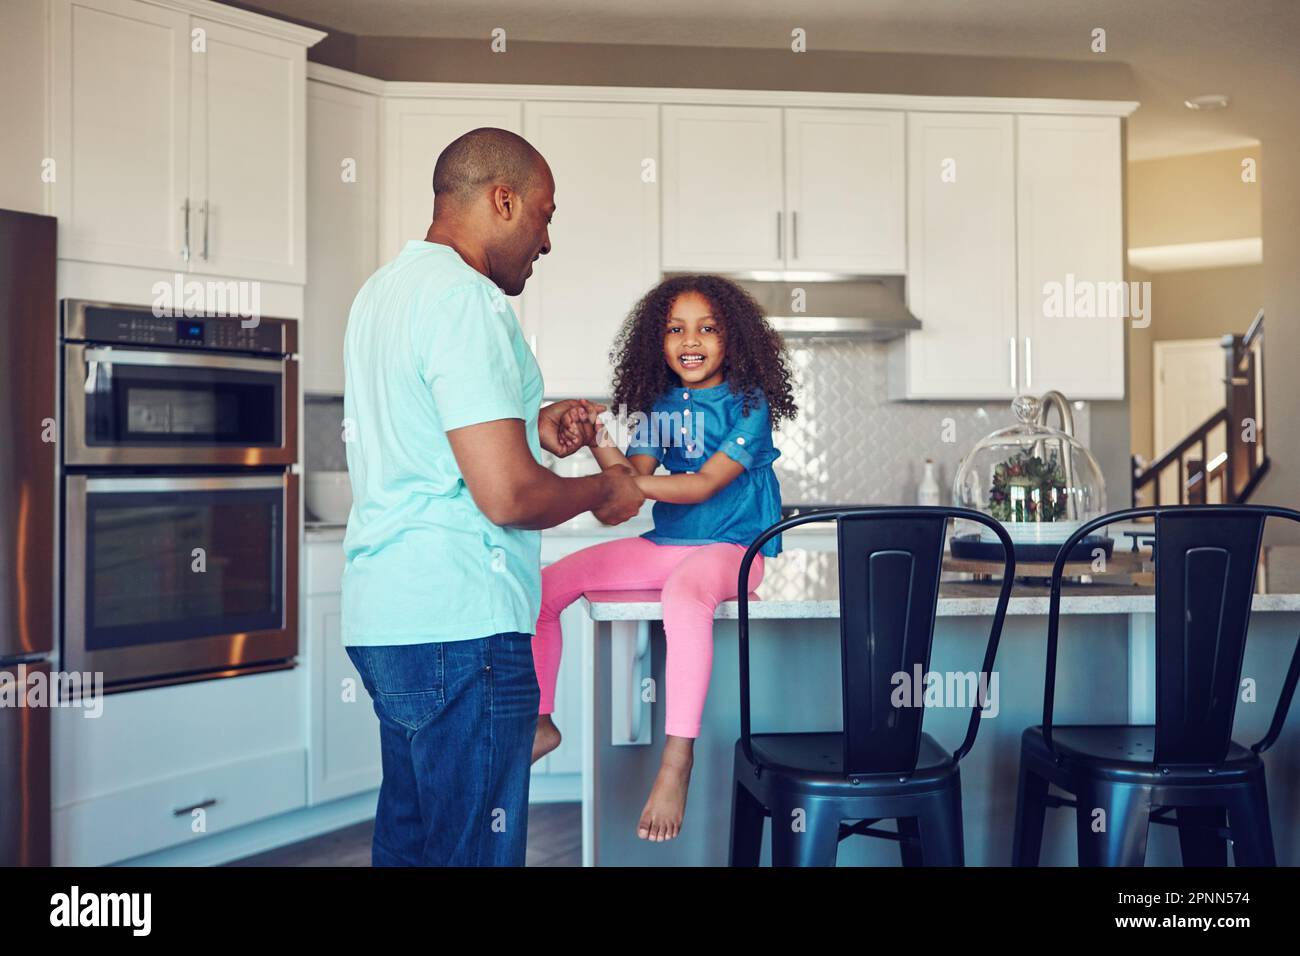 Ive got daddy wrapped around my finger. a happy little girl and her father bonding in the kitchen at home. Stock Photo